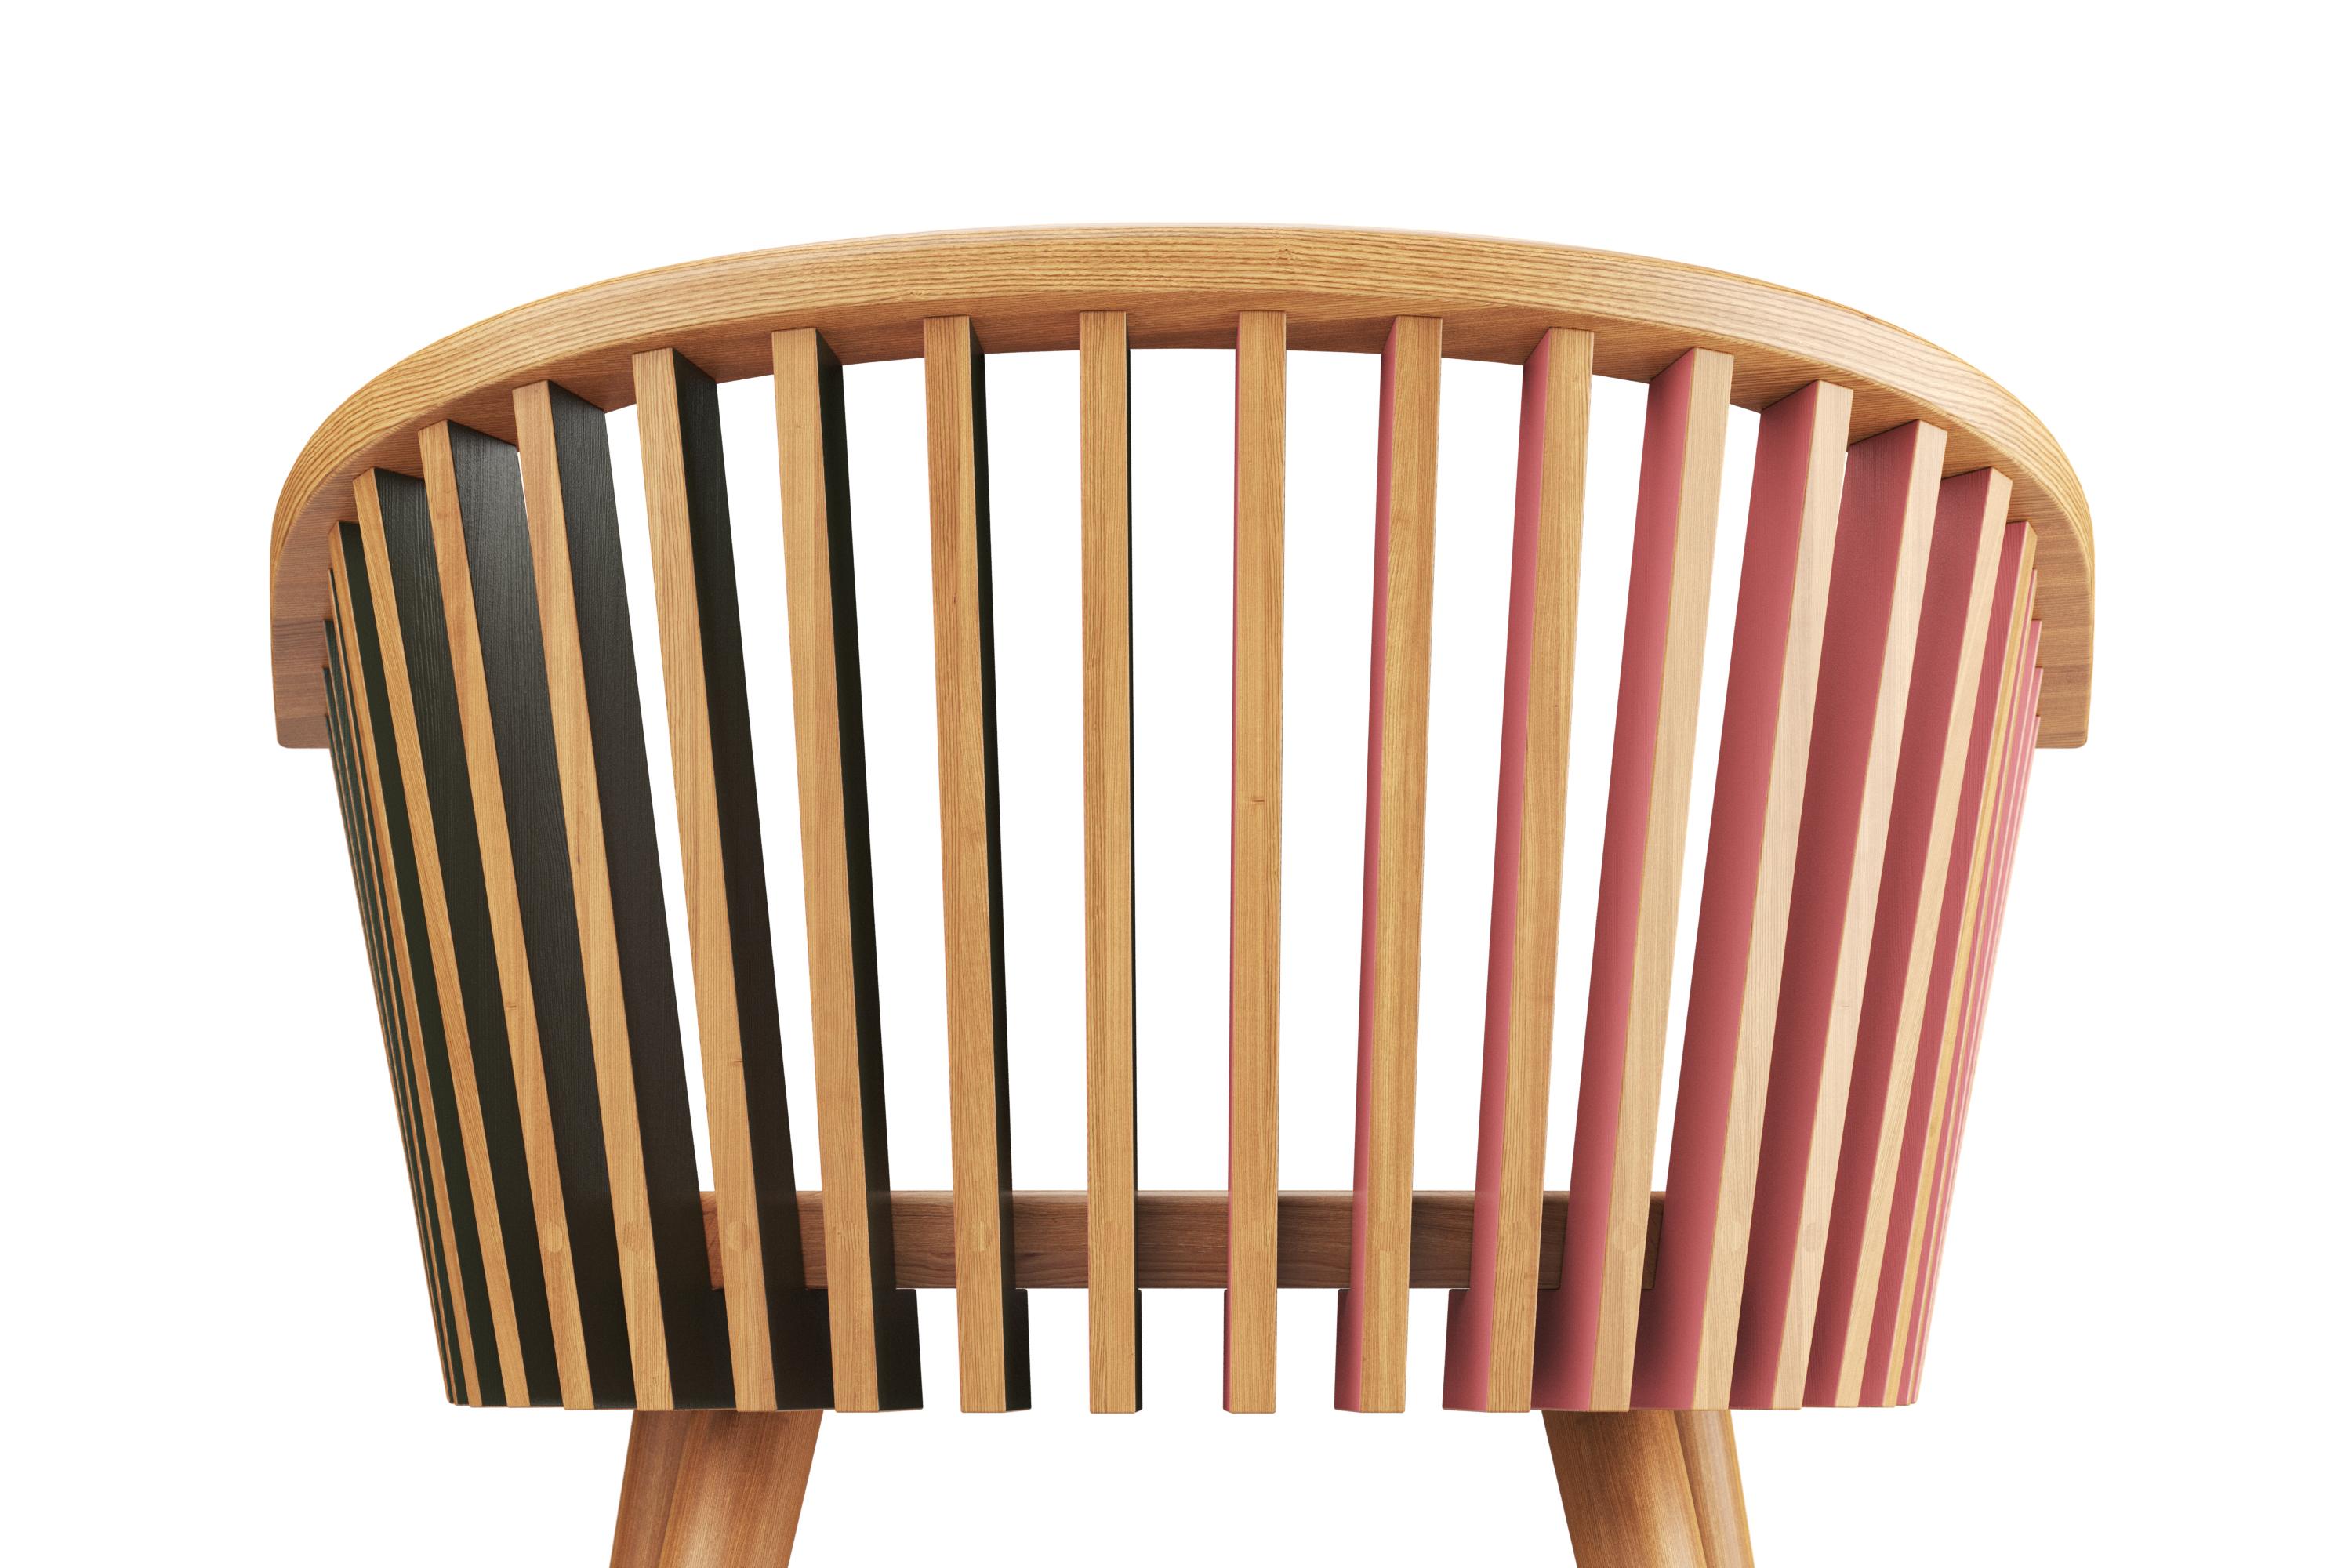 The Tornasol Rounded Chair takes a fresh approach to the solid oak chair, featuring an inviting curved wooden backrest crafted from several flat solid wood components. Each component displays a different color on opposing sides, adding a sense of